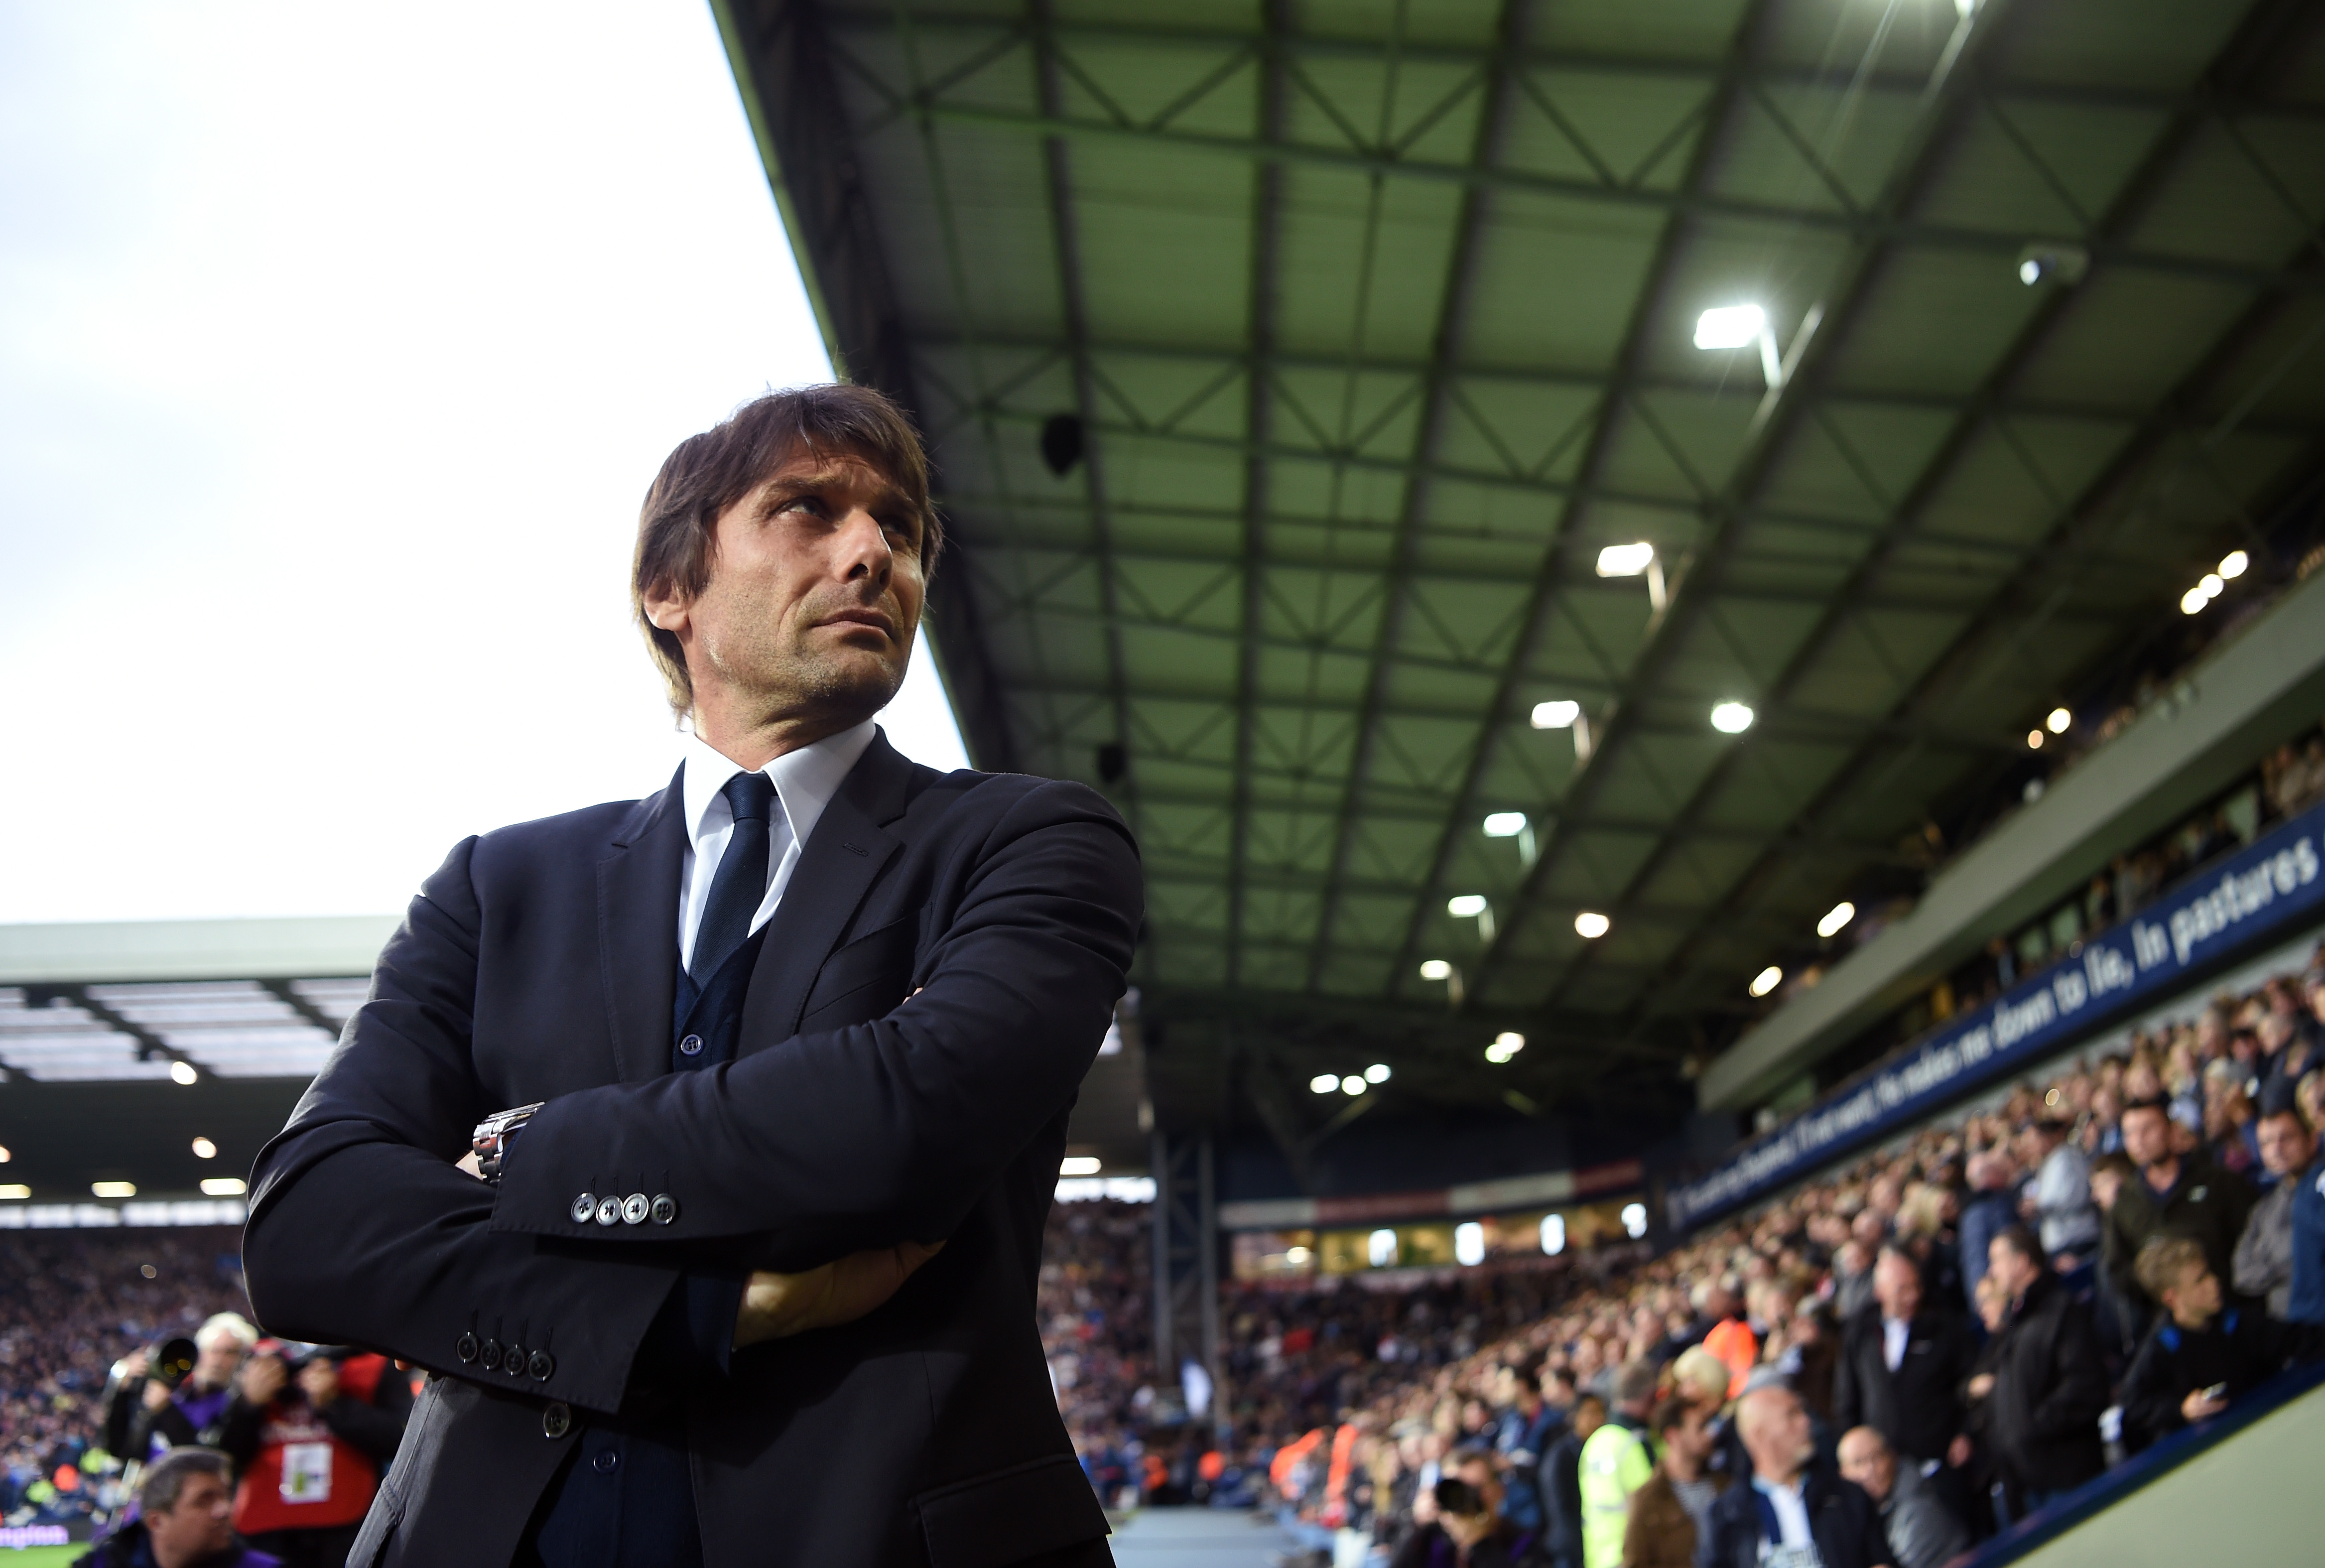 WEST BROMWICH, ENGLAND - MAY 12: Antonio Conte, Manager of Chelsea looks on prior to the Premier League match between West Bromwich Albion and Chelsea at The Hawthorns on May 12, 2017 in West Bromwich, England.  (Photo by Michael Regan/Getty Images)